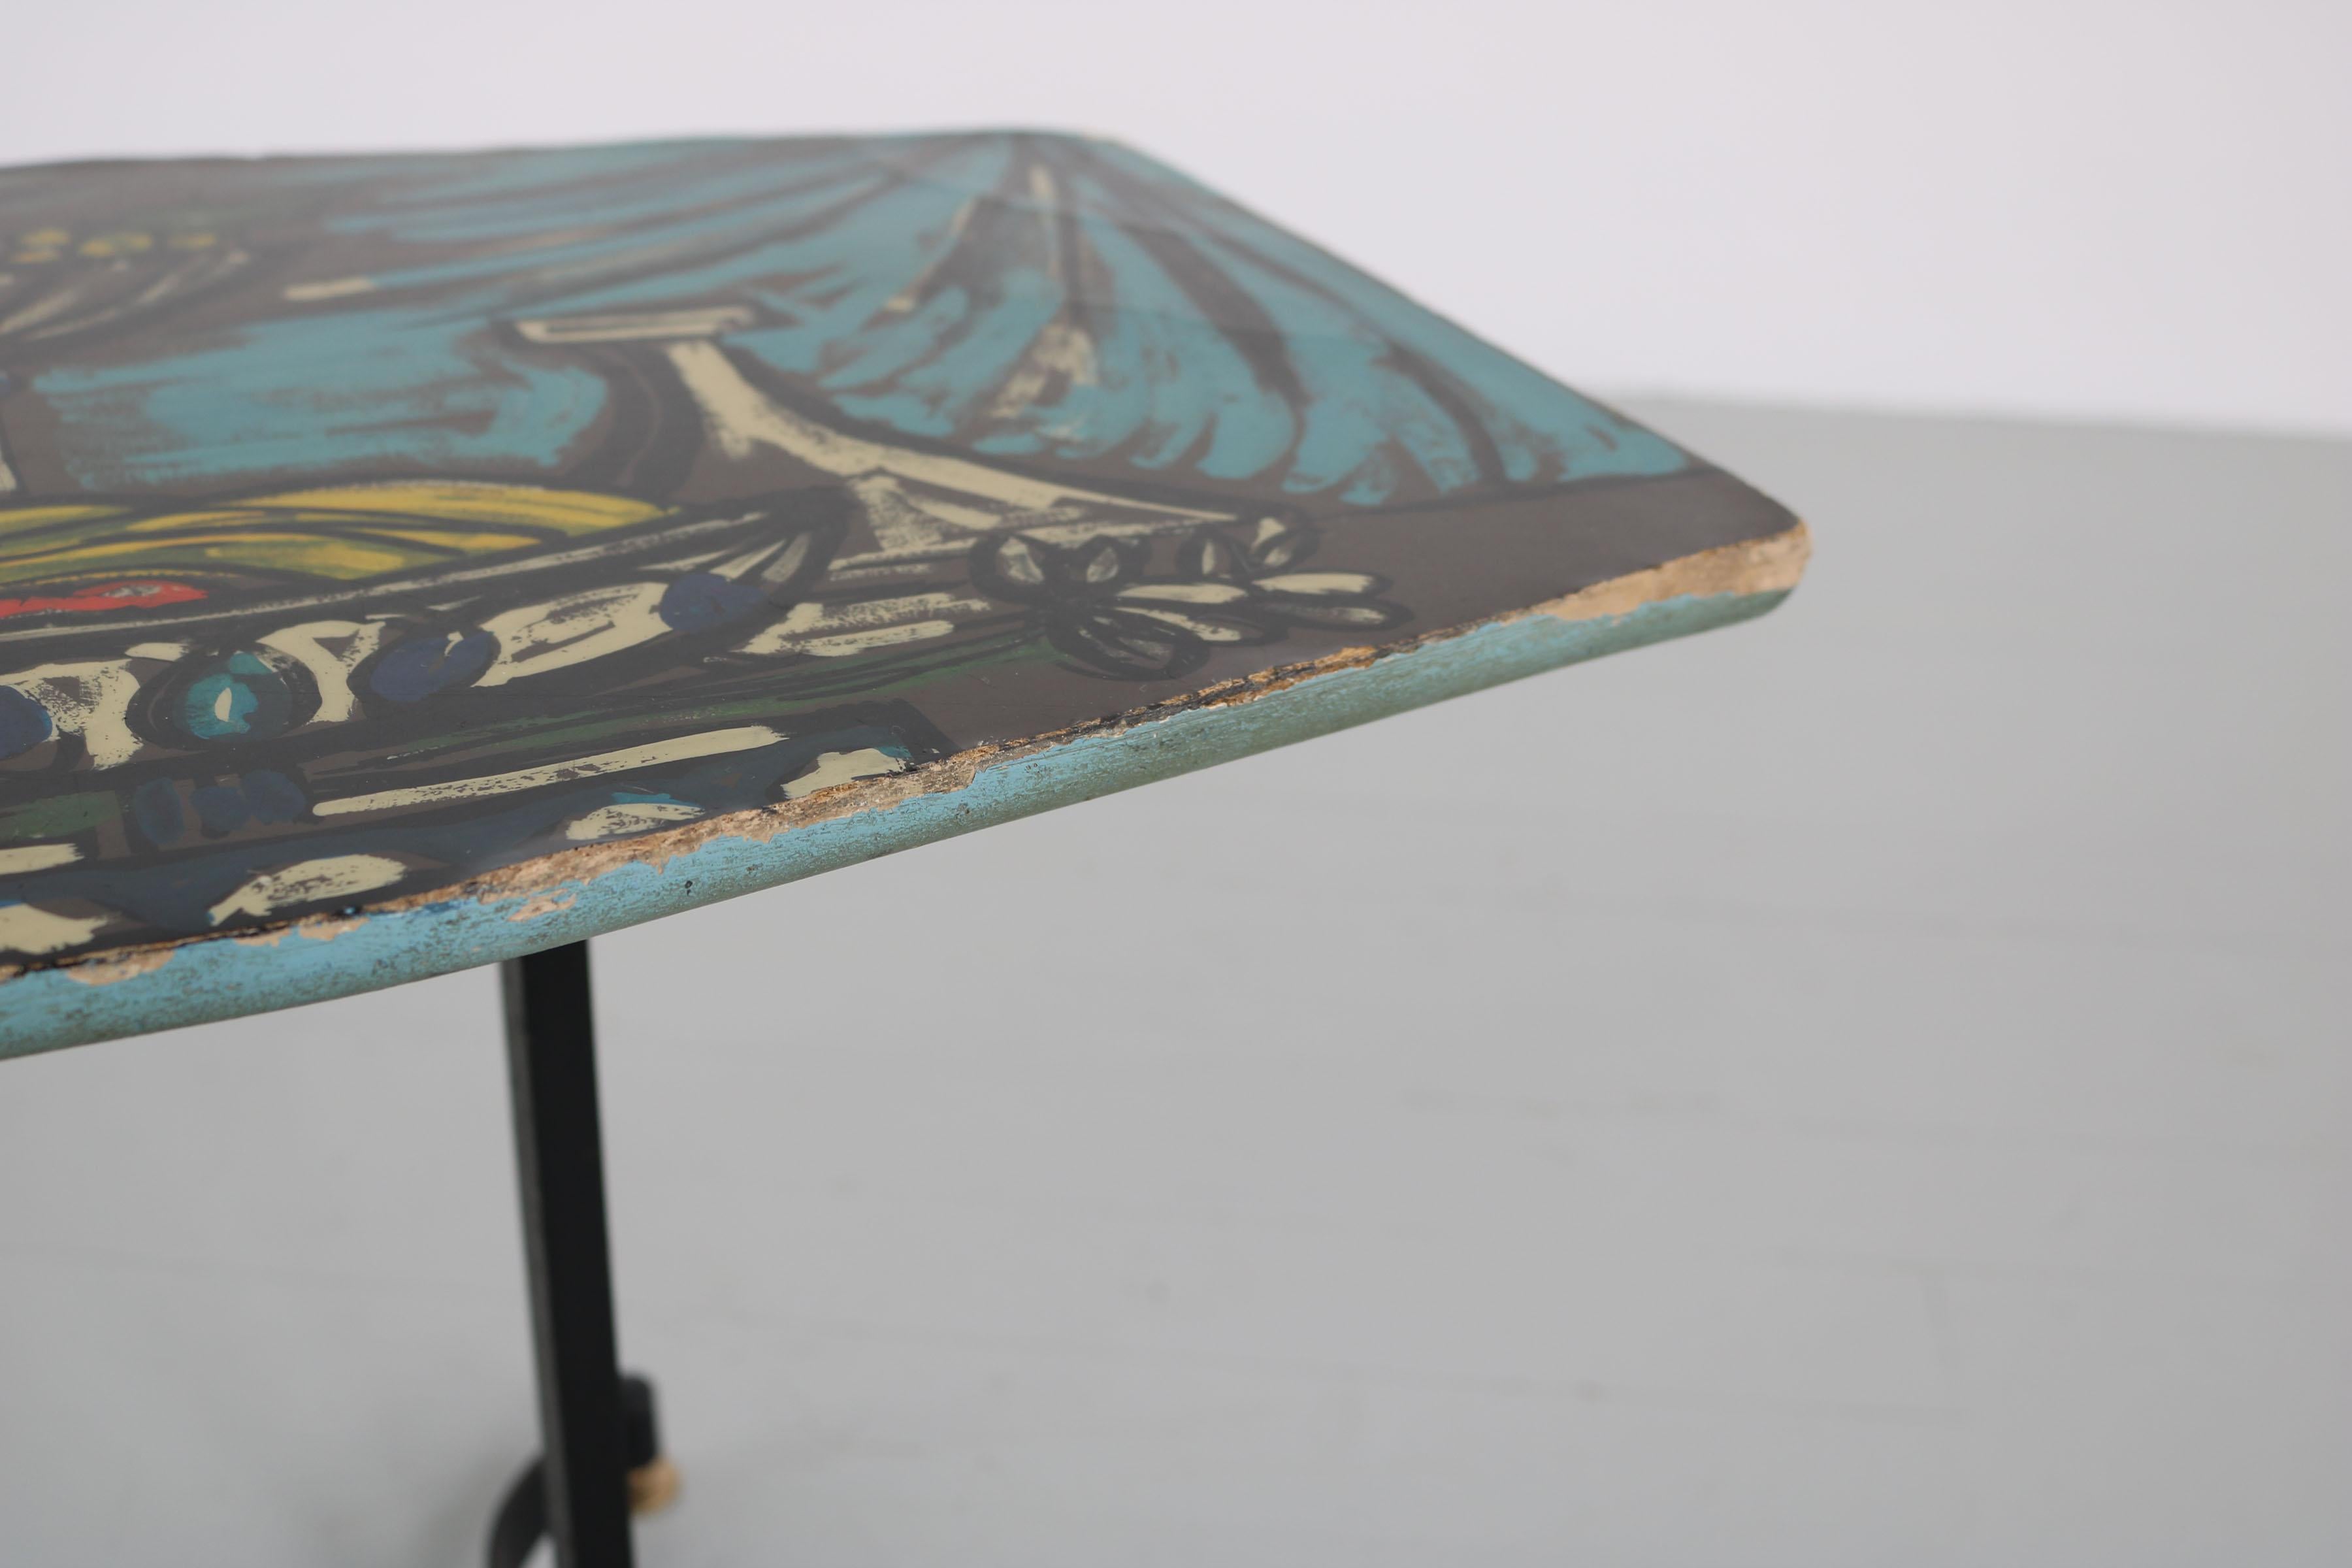 Italian Dark Sofa Table with Colorful Hand-Painted Motives on Table Top, 1950s For Sale 2